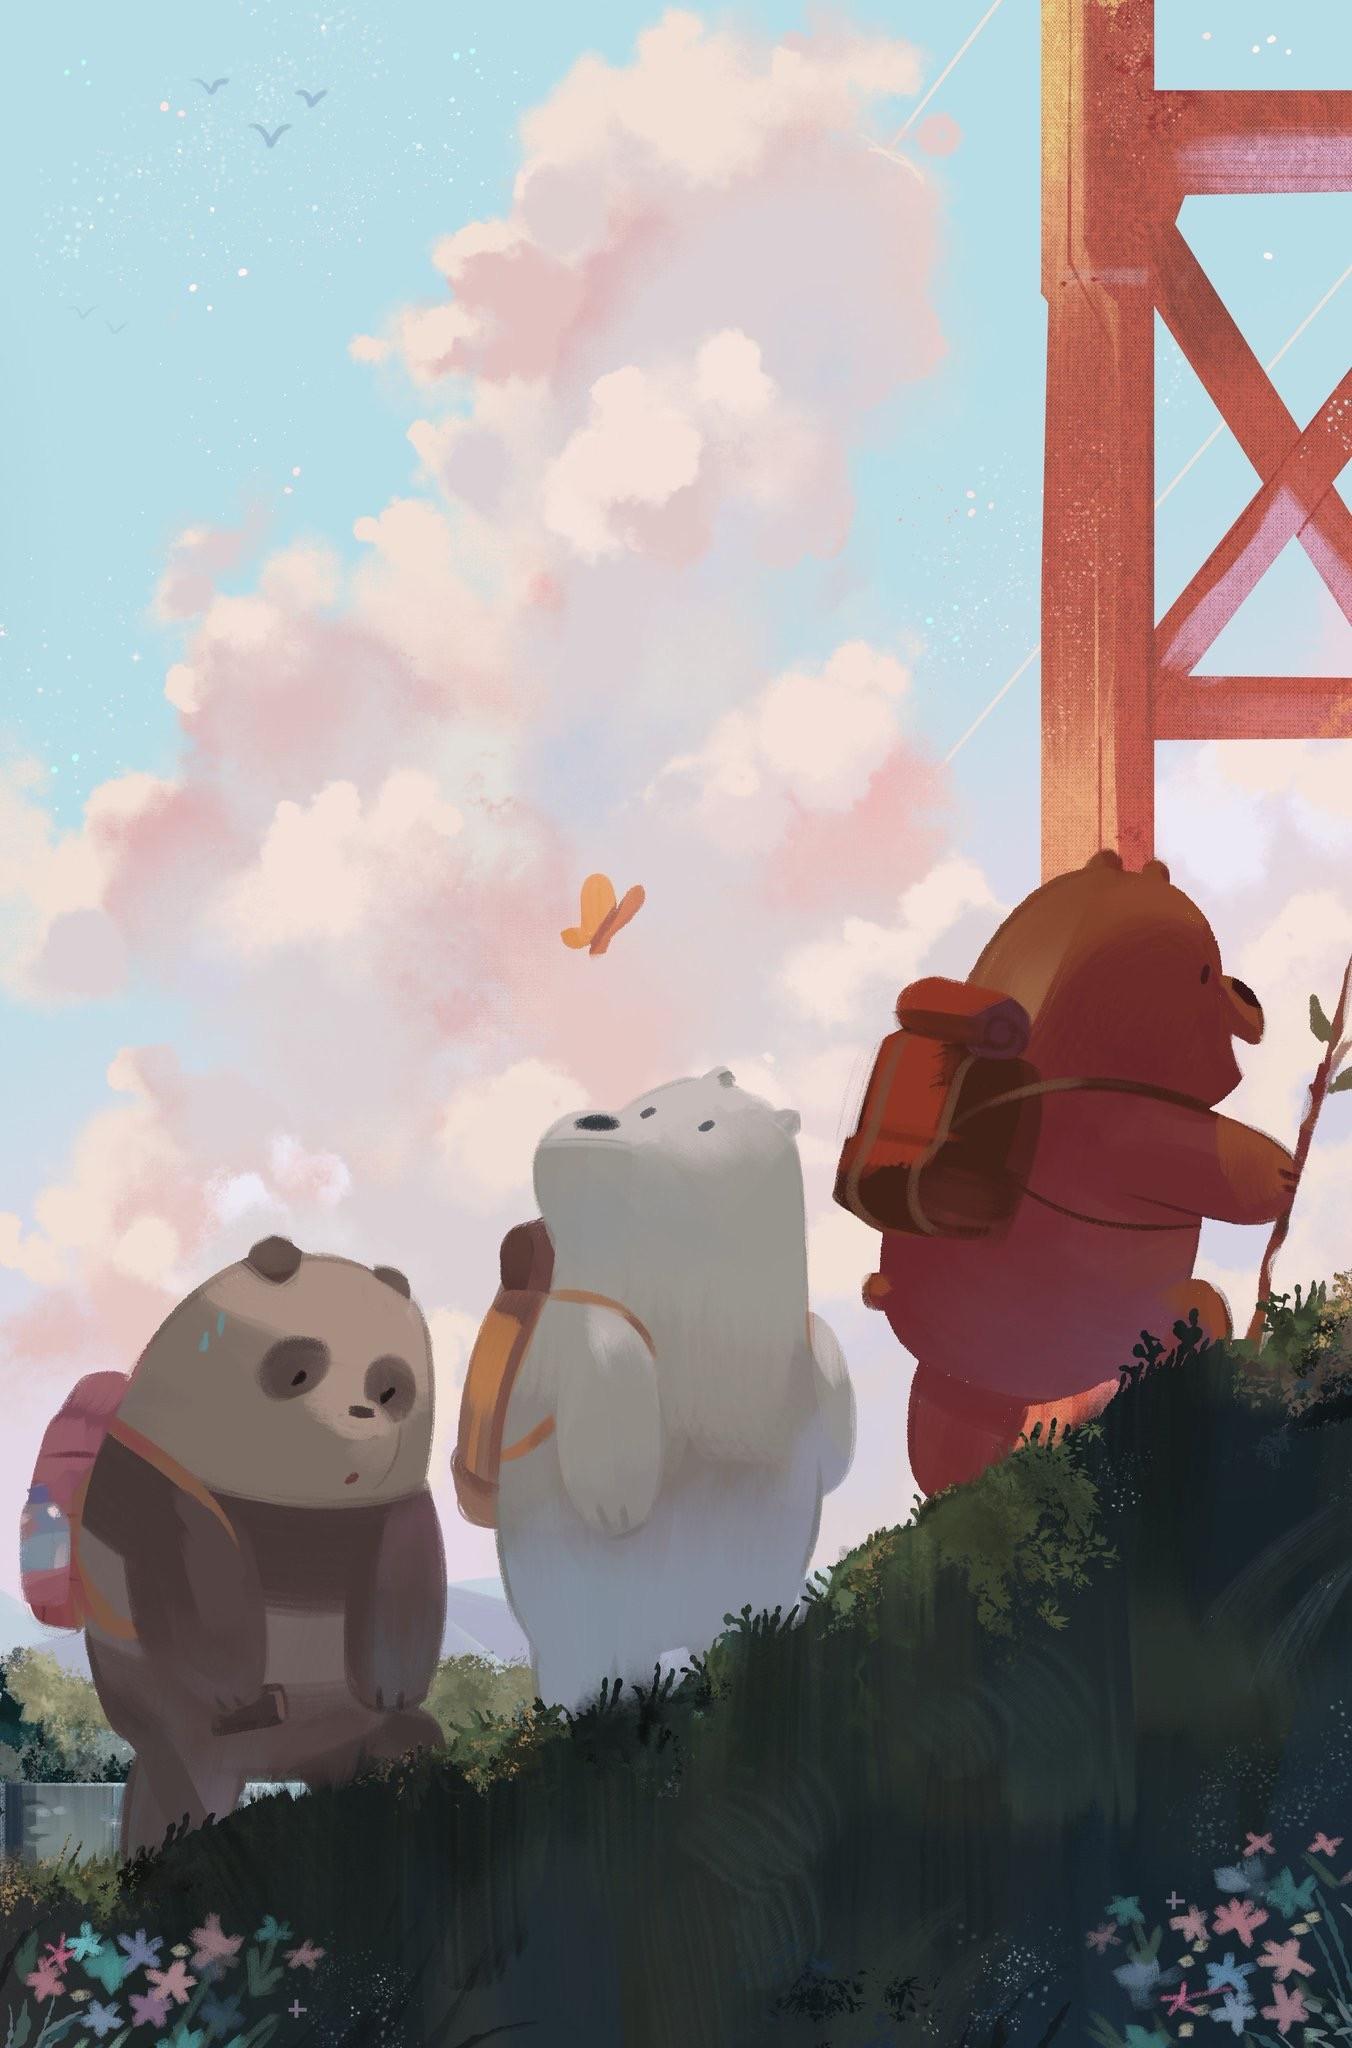 Aesthetic We Bare Bears Wallpapers - Wallpaper Cave